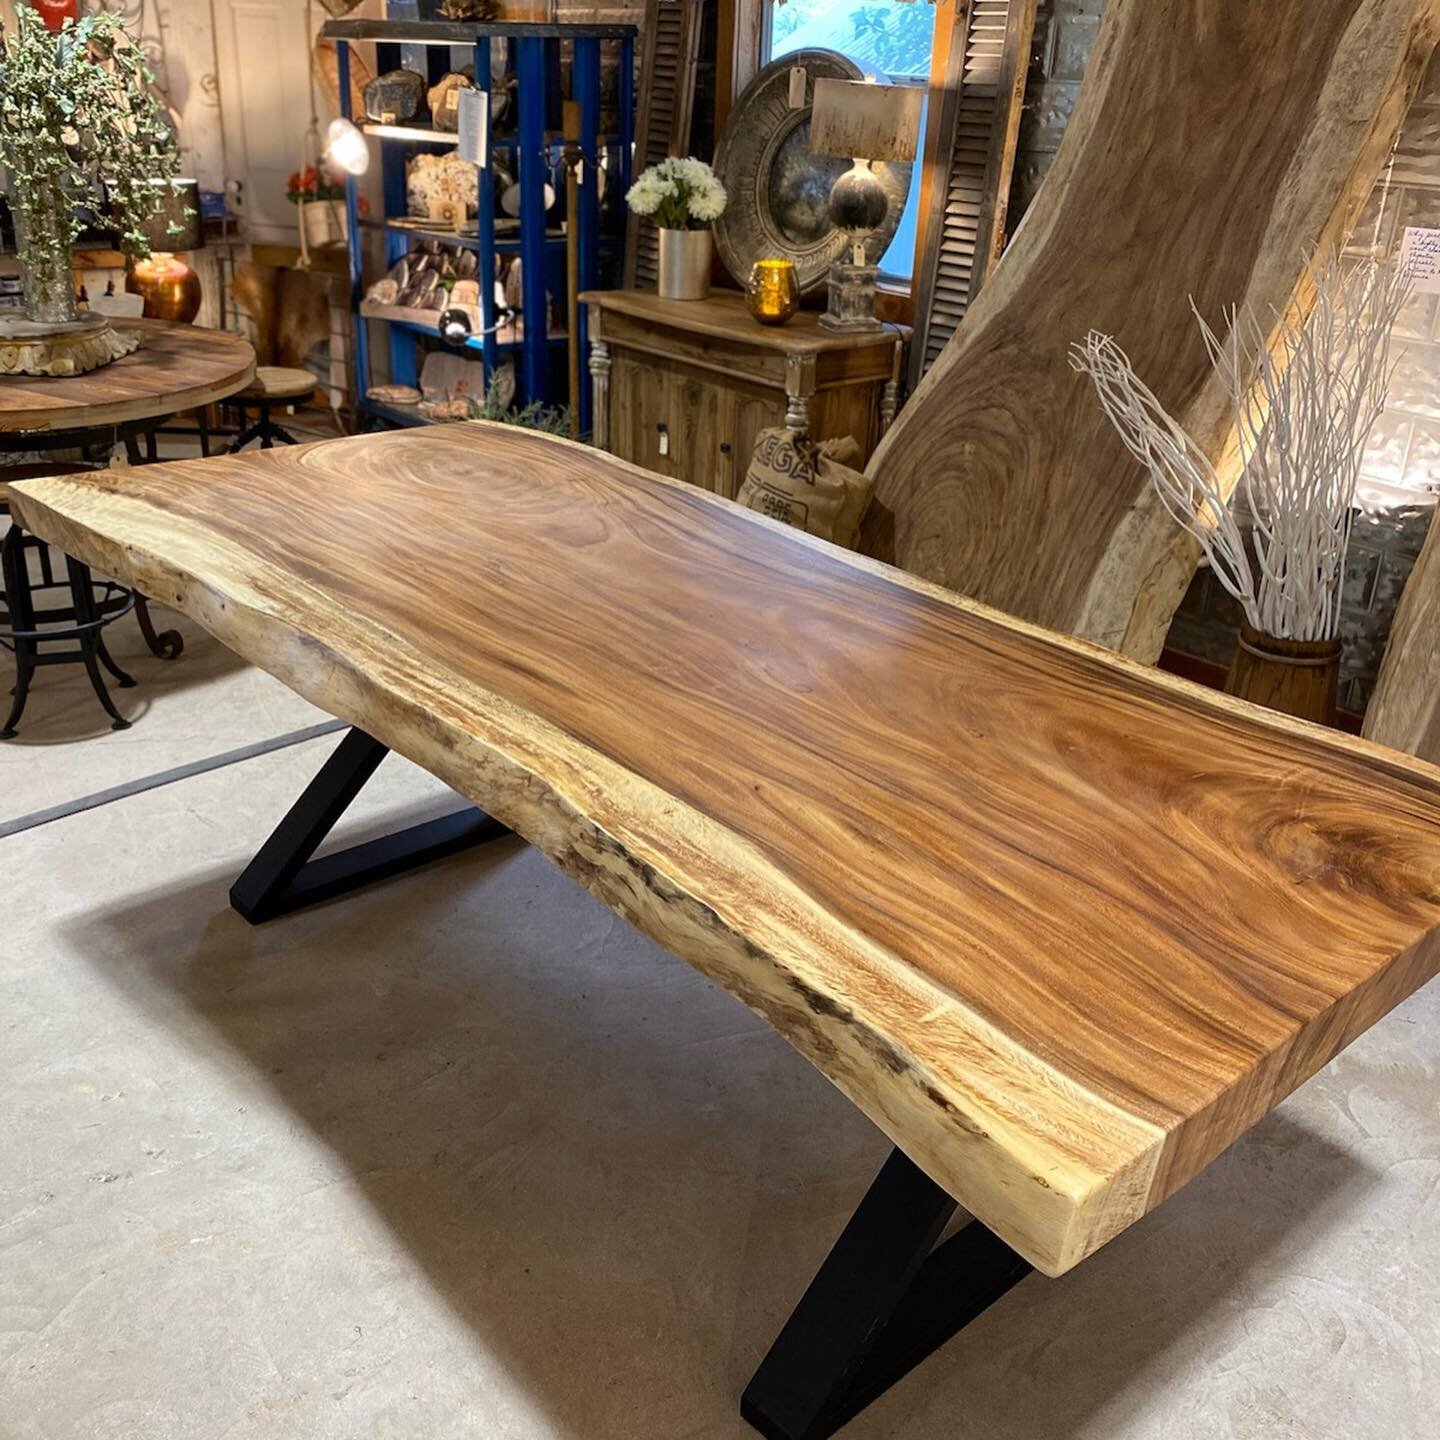 Just in!  Two gorgeous parota wood tables. 

This table measures approximately 97&rdquo; long, and 44&rdquo; wide. 

What is parota wood?  It is a highly prized sustainable wood common to tropical climates. It is considered durable, and native to Mex